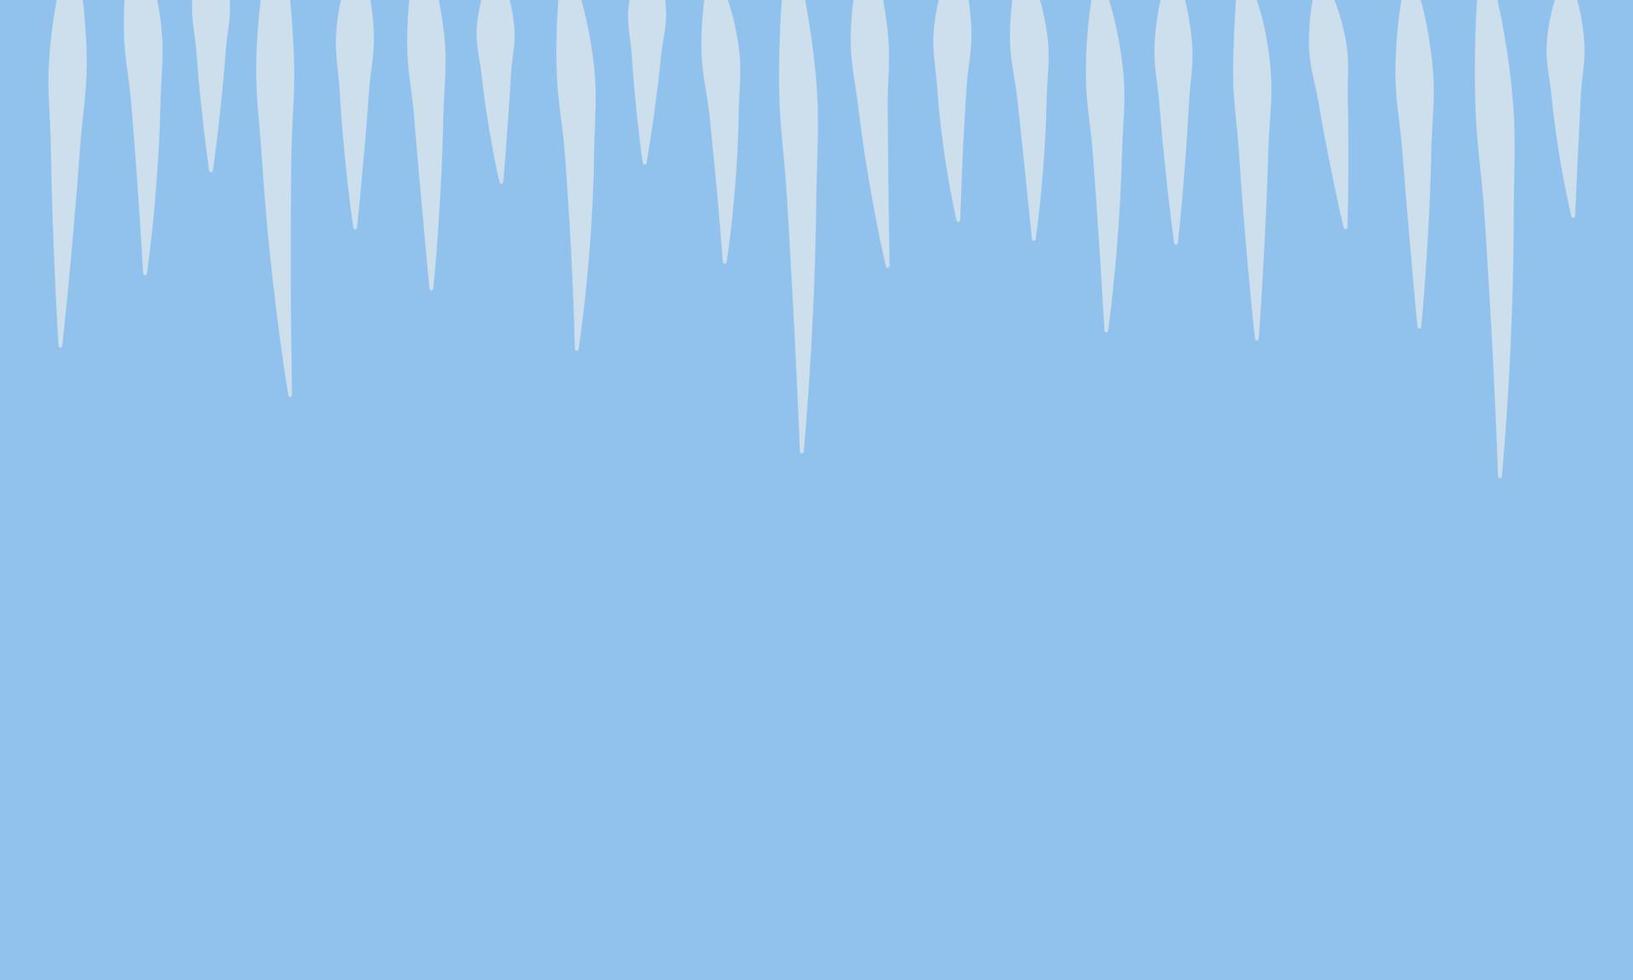 Blue winter background with icicles on the upper edge. vector illustration